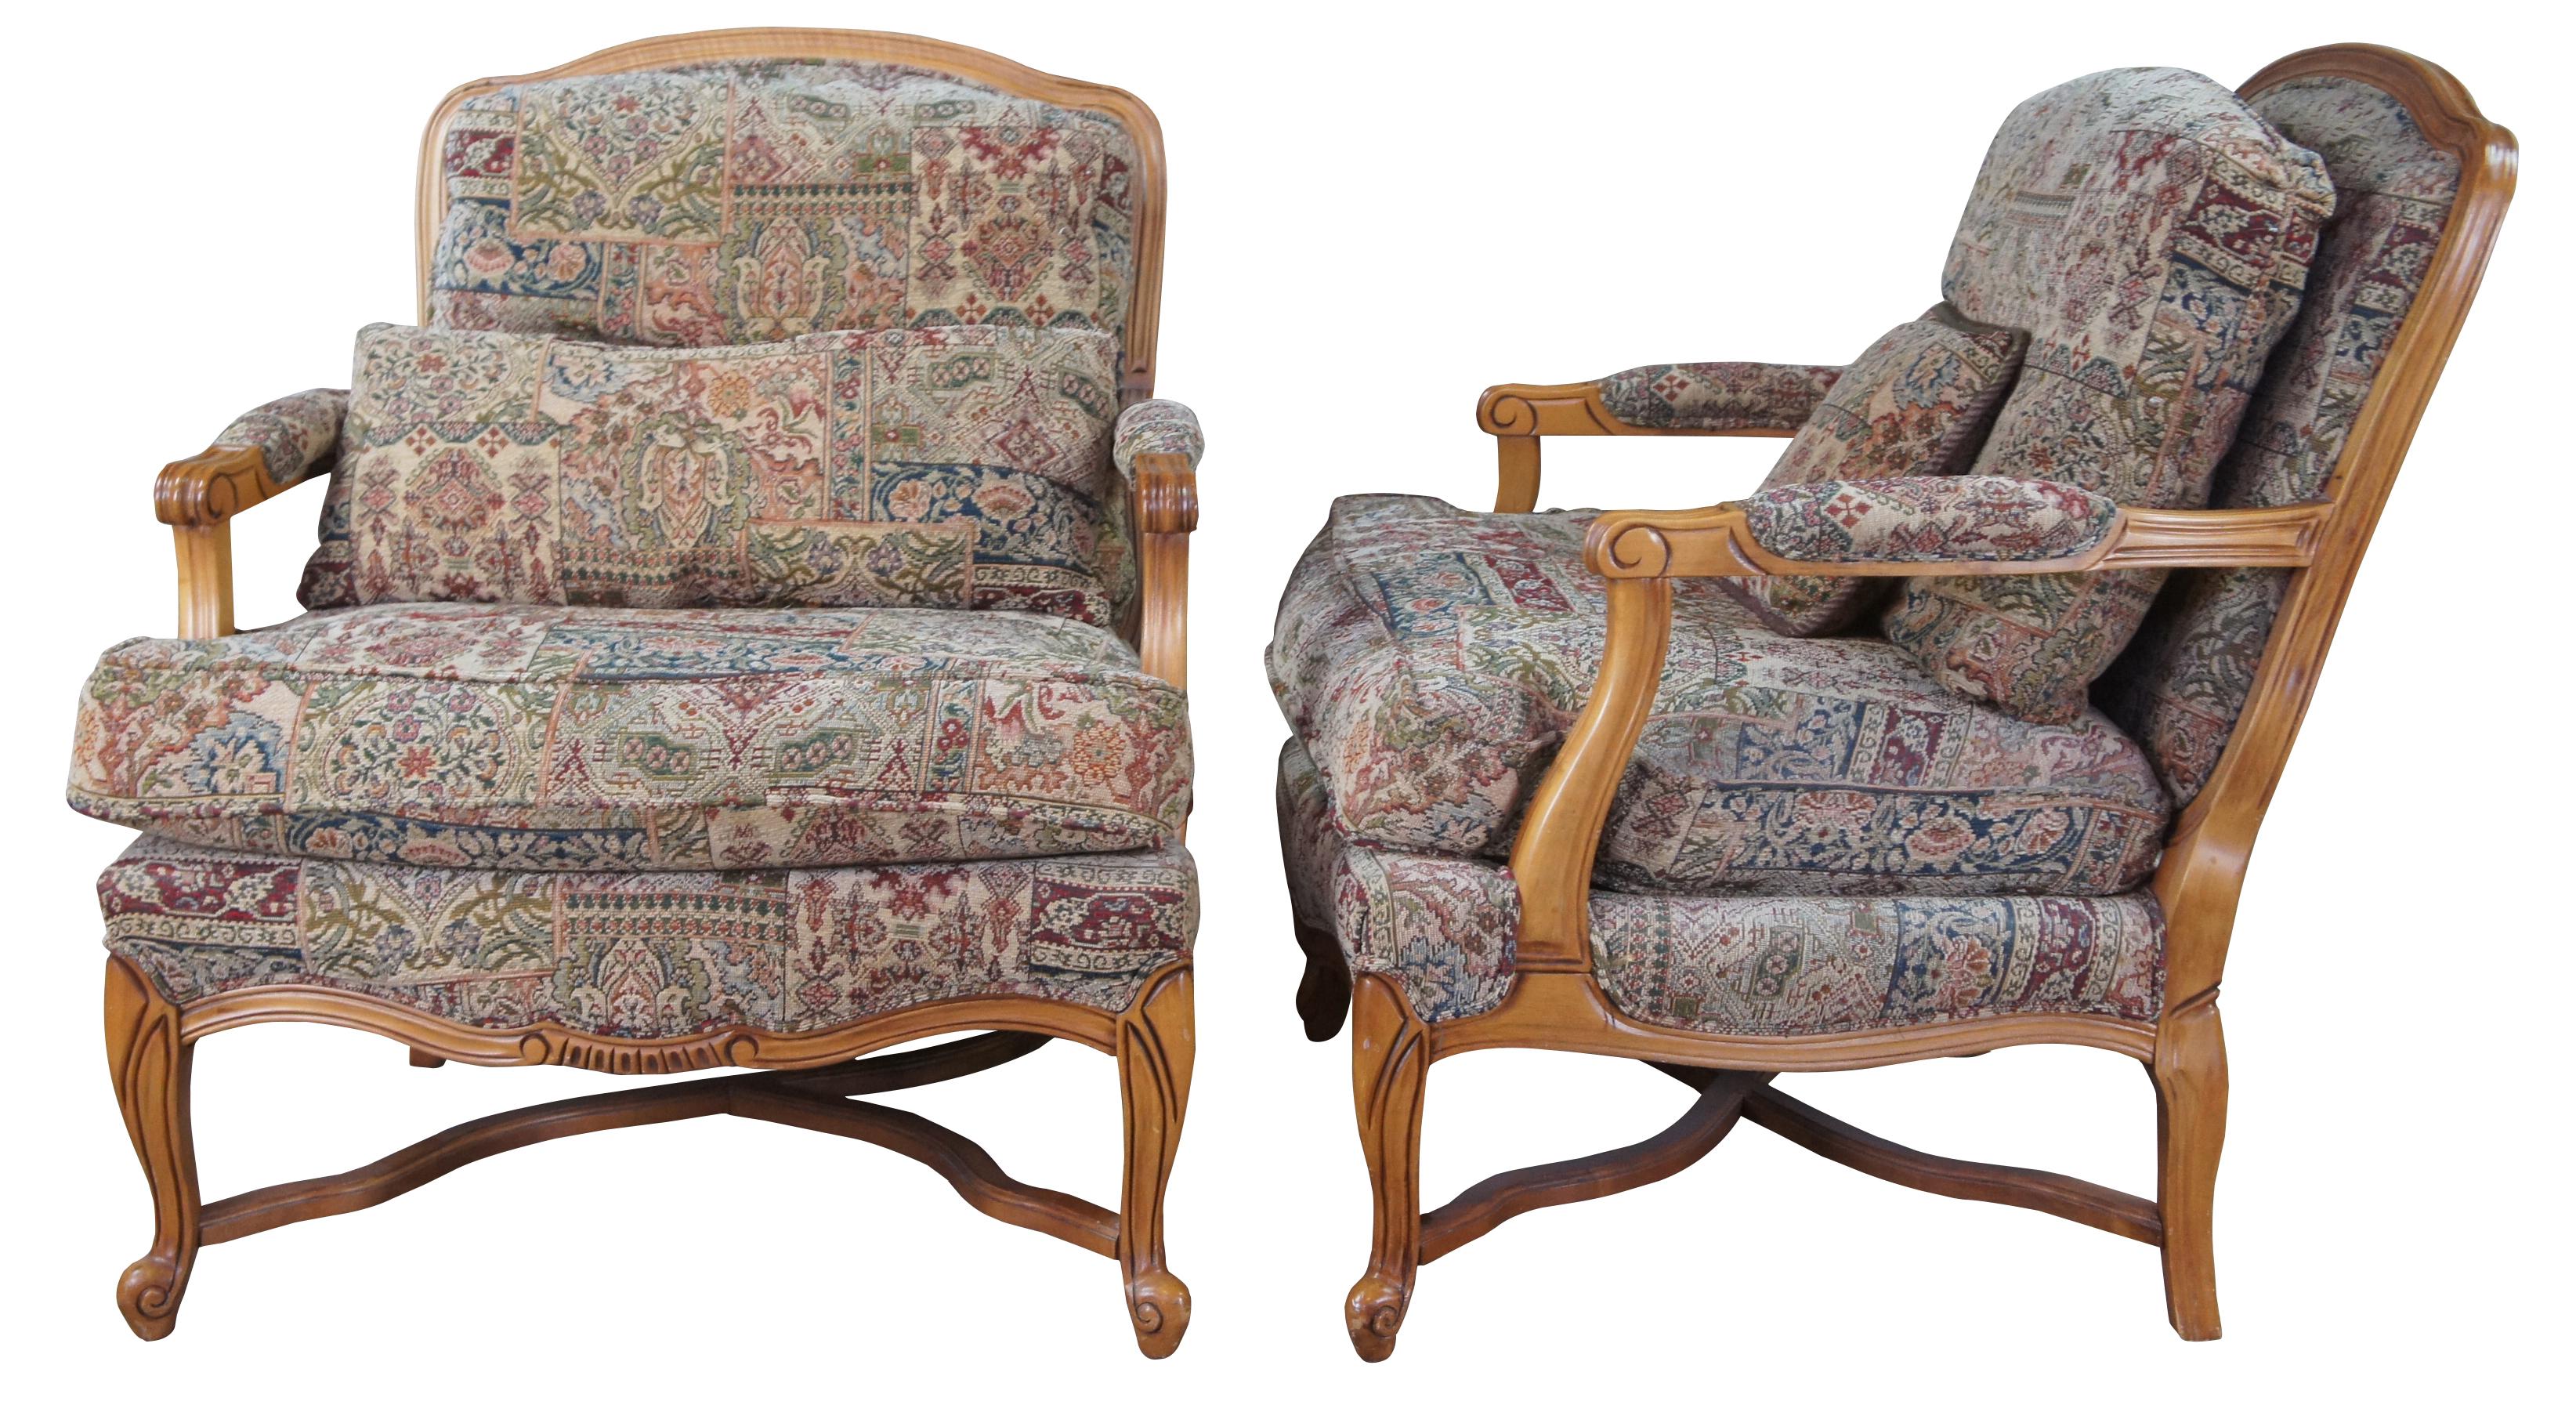 Pair of two vintage French Provincial arm chairs and ottoman. Features fauteuil style exposed wood frame with padded arms, cabriole feet and X stretcher.

Measures: Chair - 30